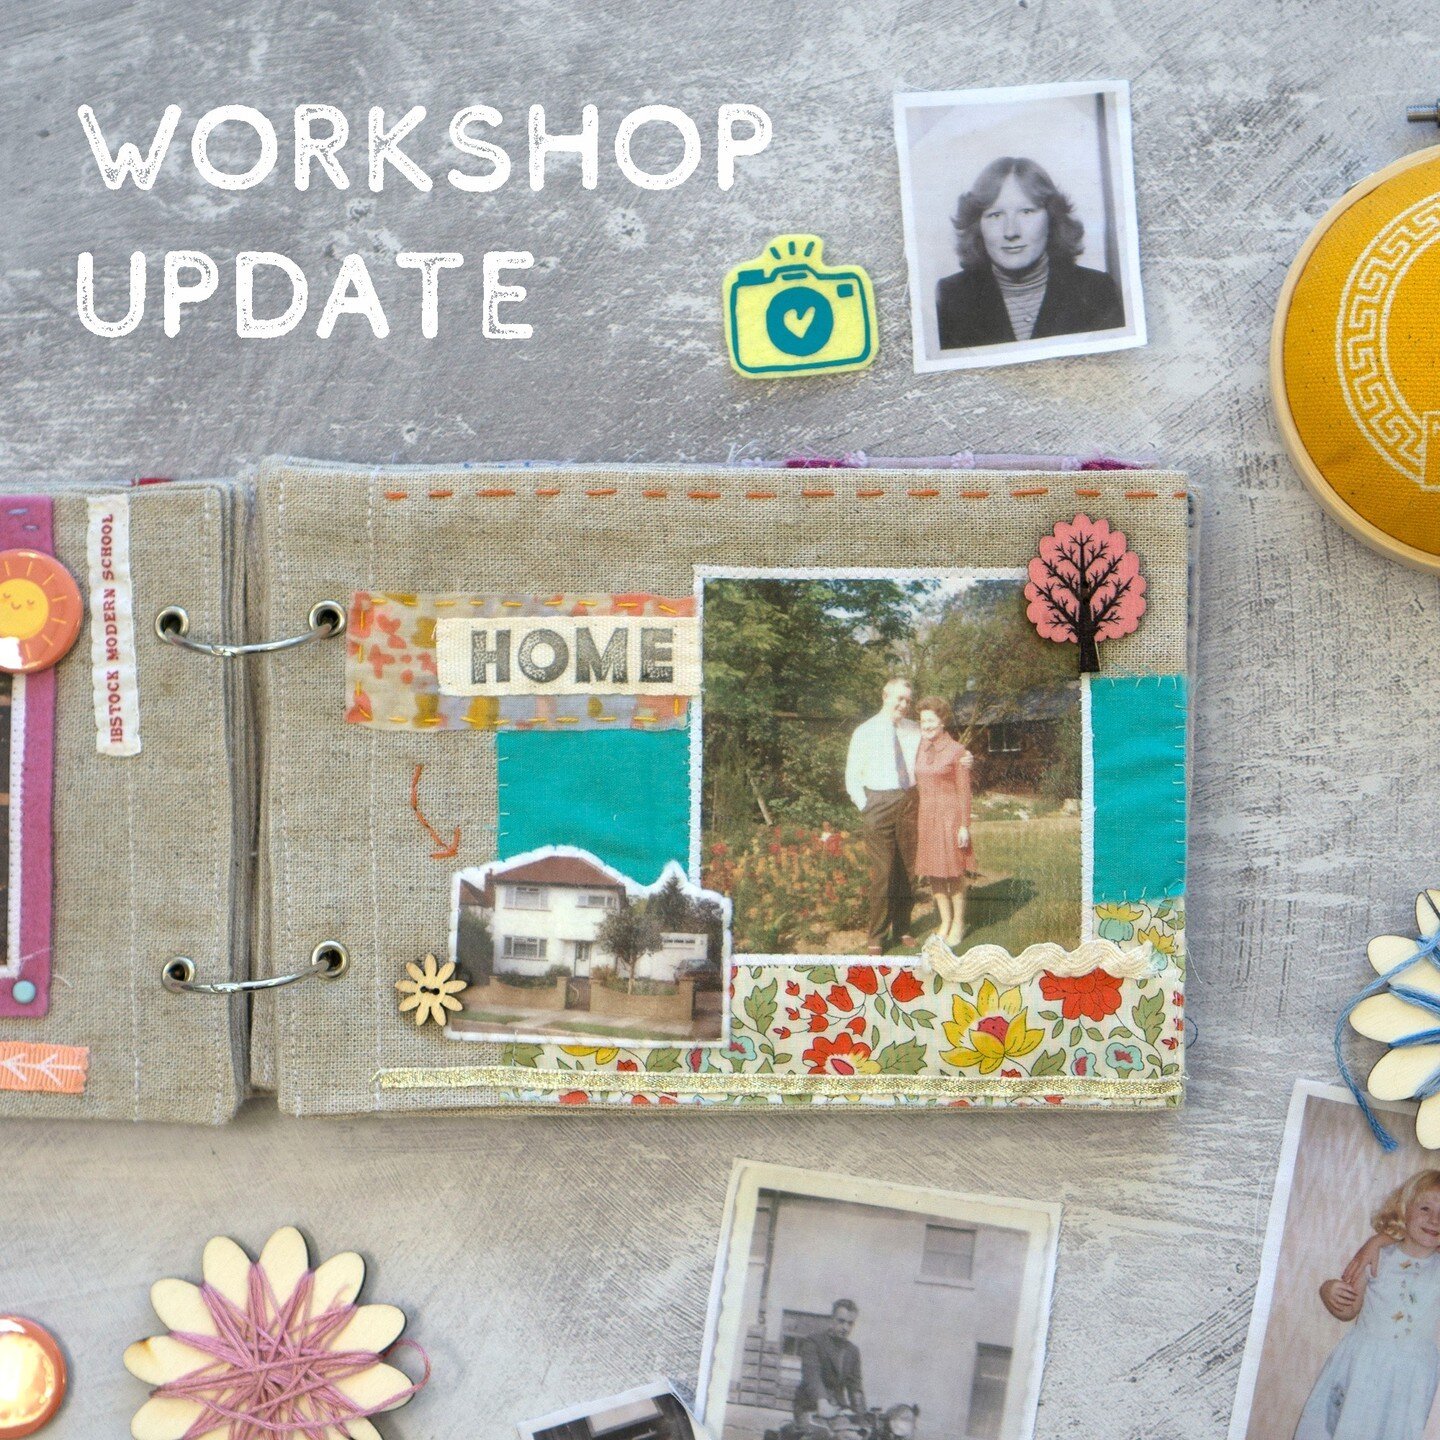 Workshop update.⁠
⁠
In a month, I'm running a three day Stitchbook workshop over the weekend of the 16th-18th June as part of Creative Sewing Weekends. This is an amazing opportunity for you to come and make your own Stitchbook, learn all of the tips